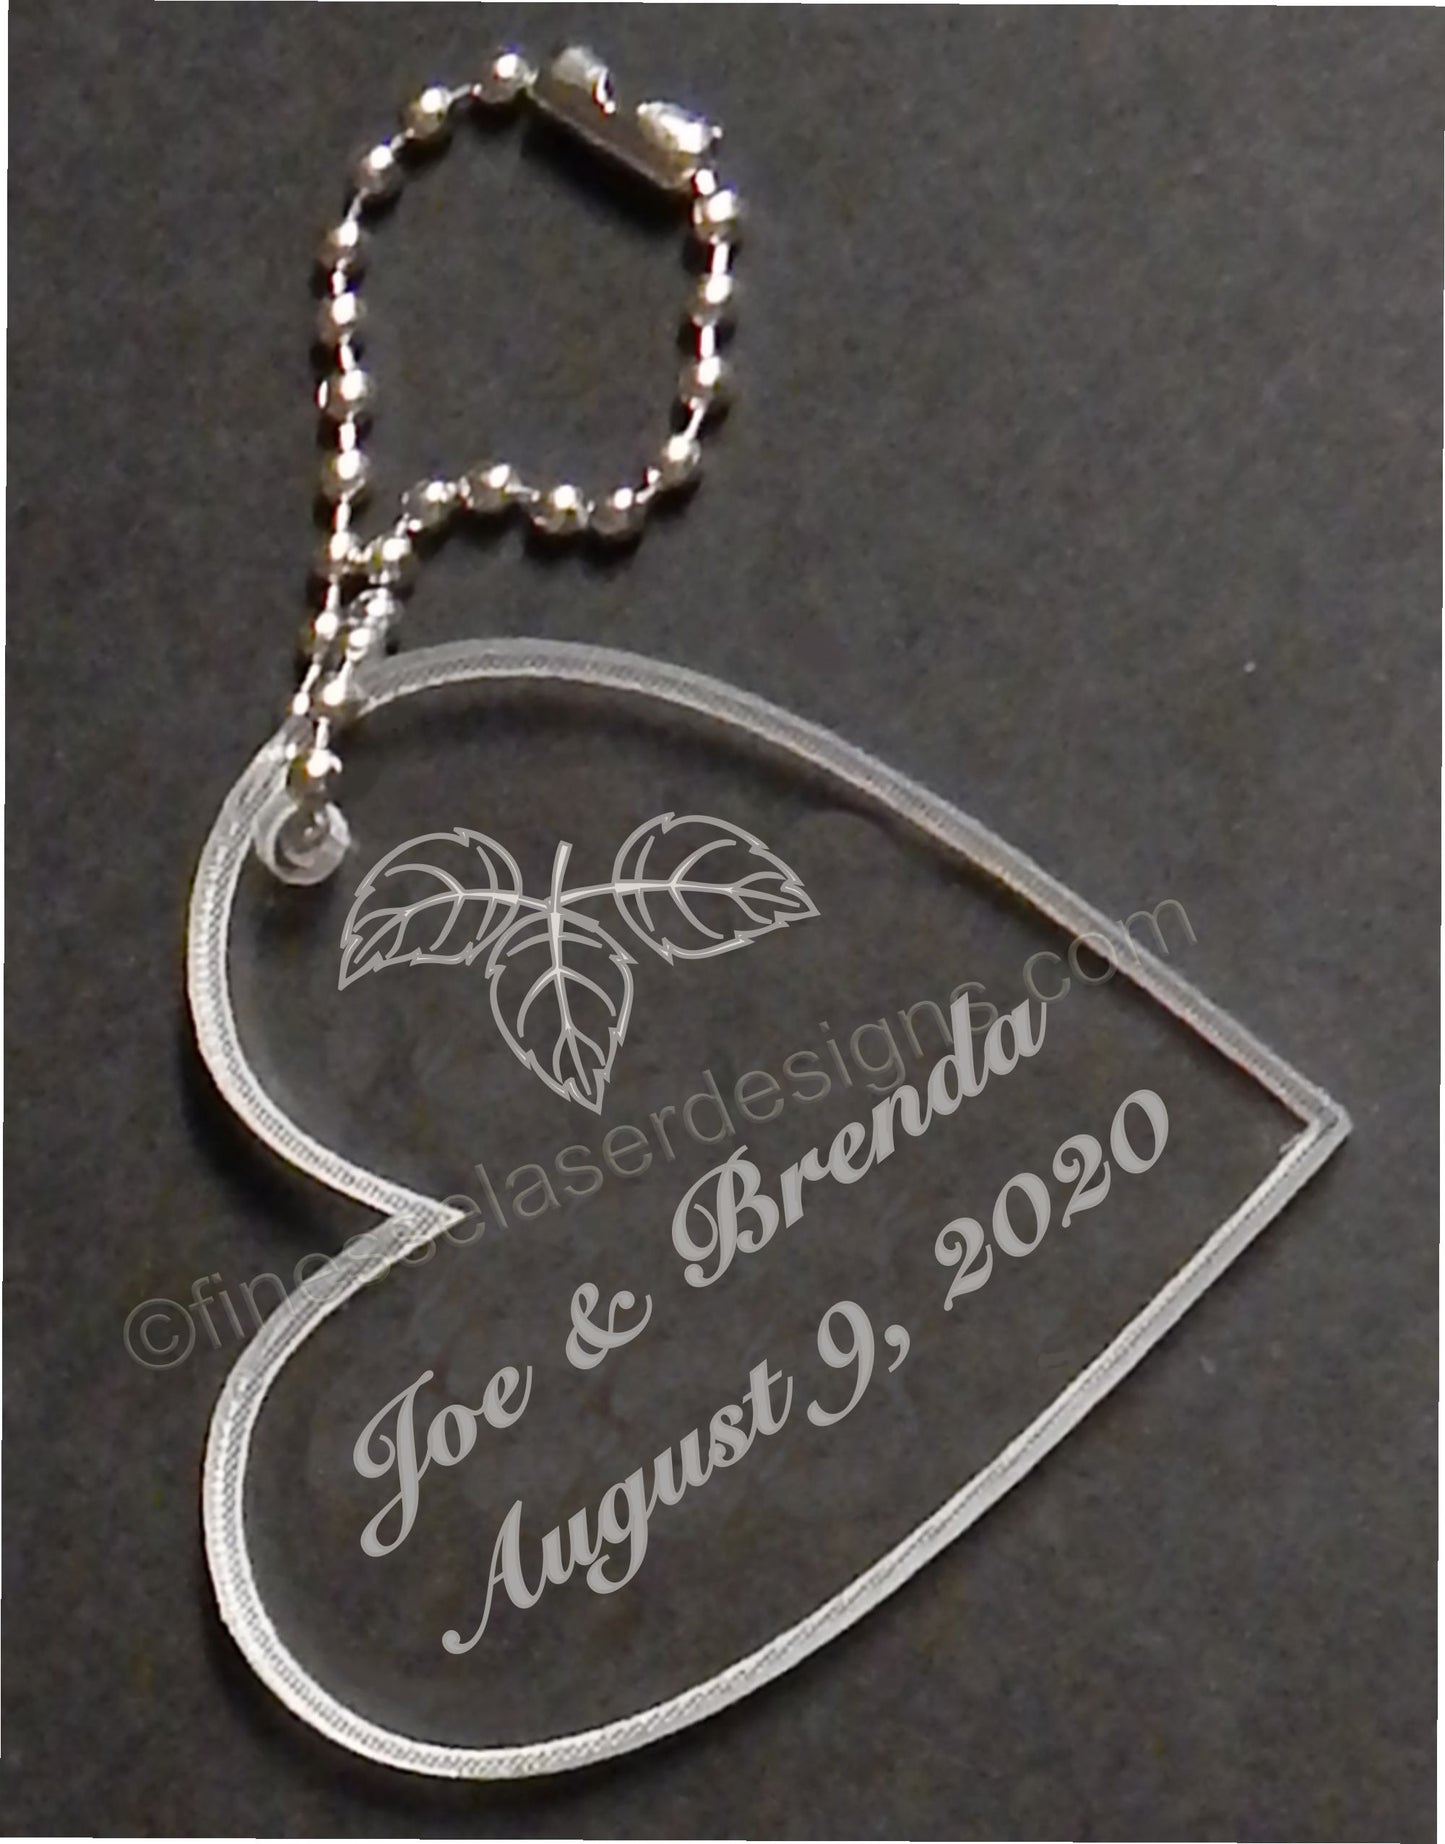 acrylic heart shaped keychain designed with fall leaves and engraved with names and date